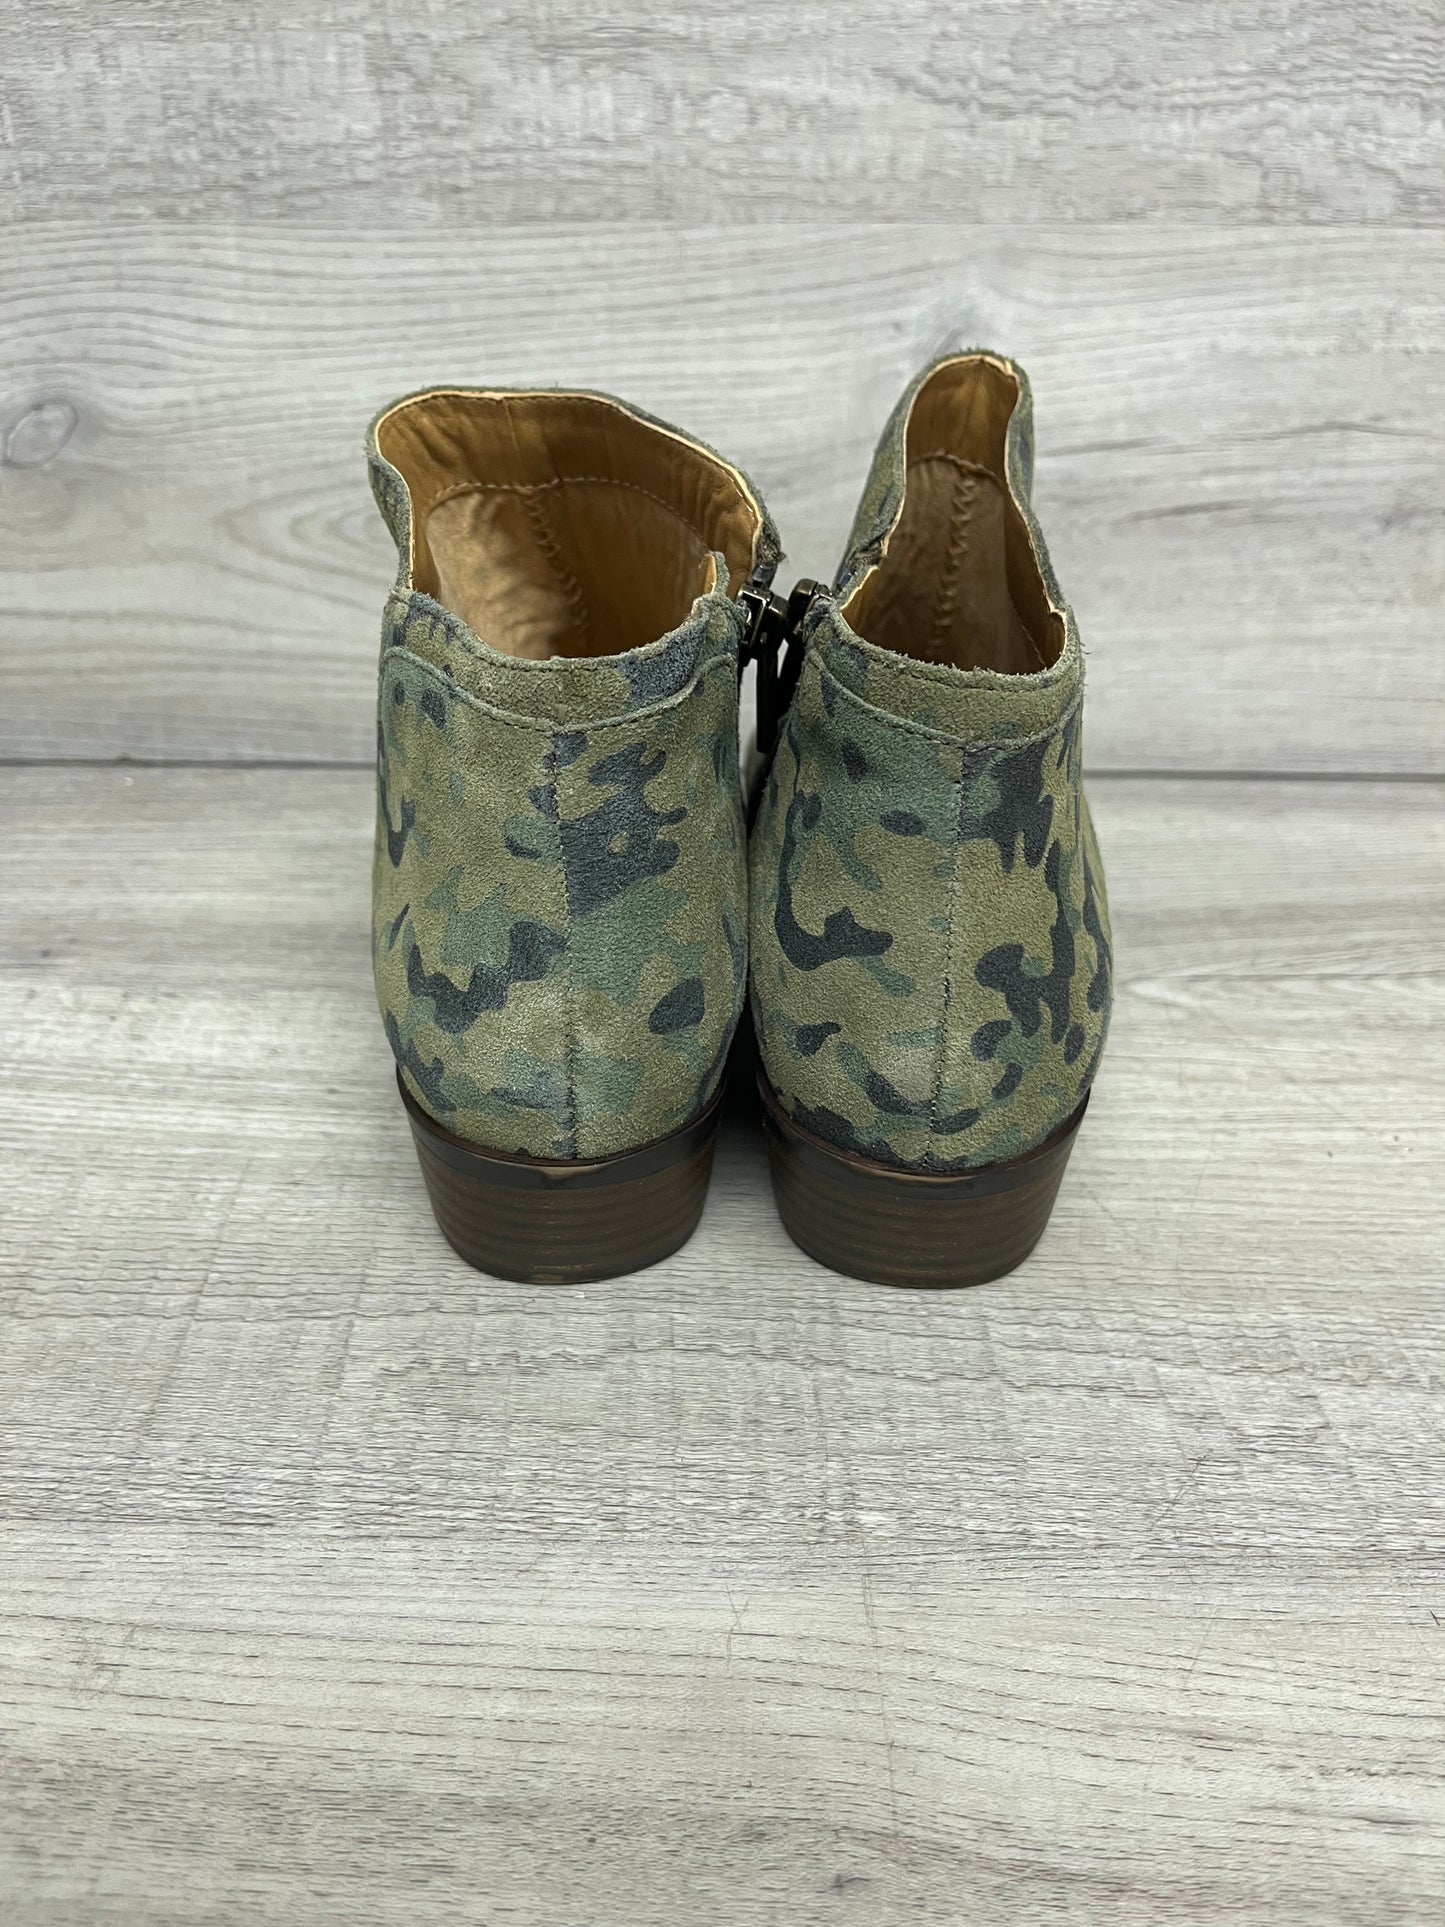 Lucky Brand Camo Ankle Boots Sz 7M